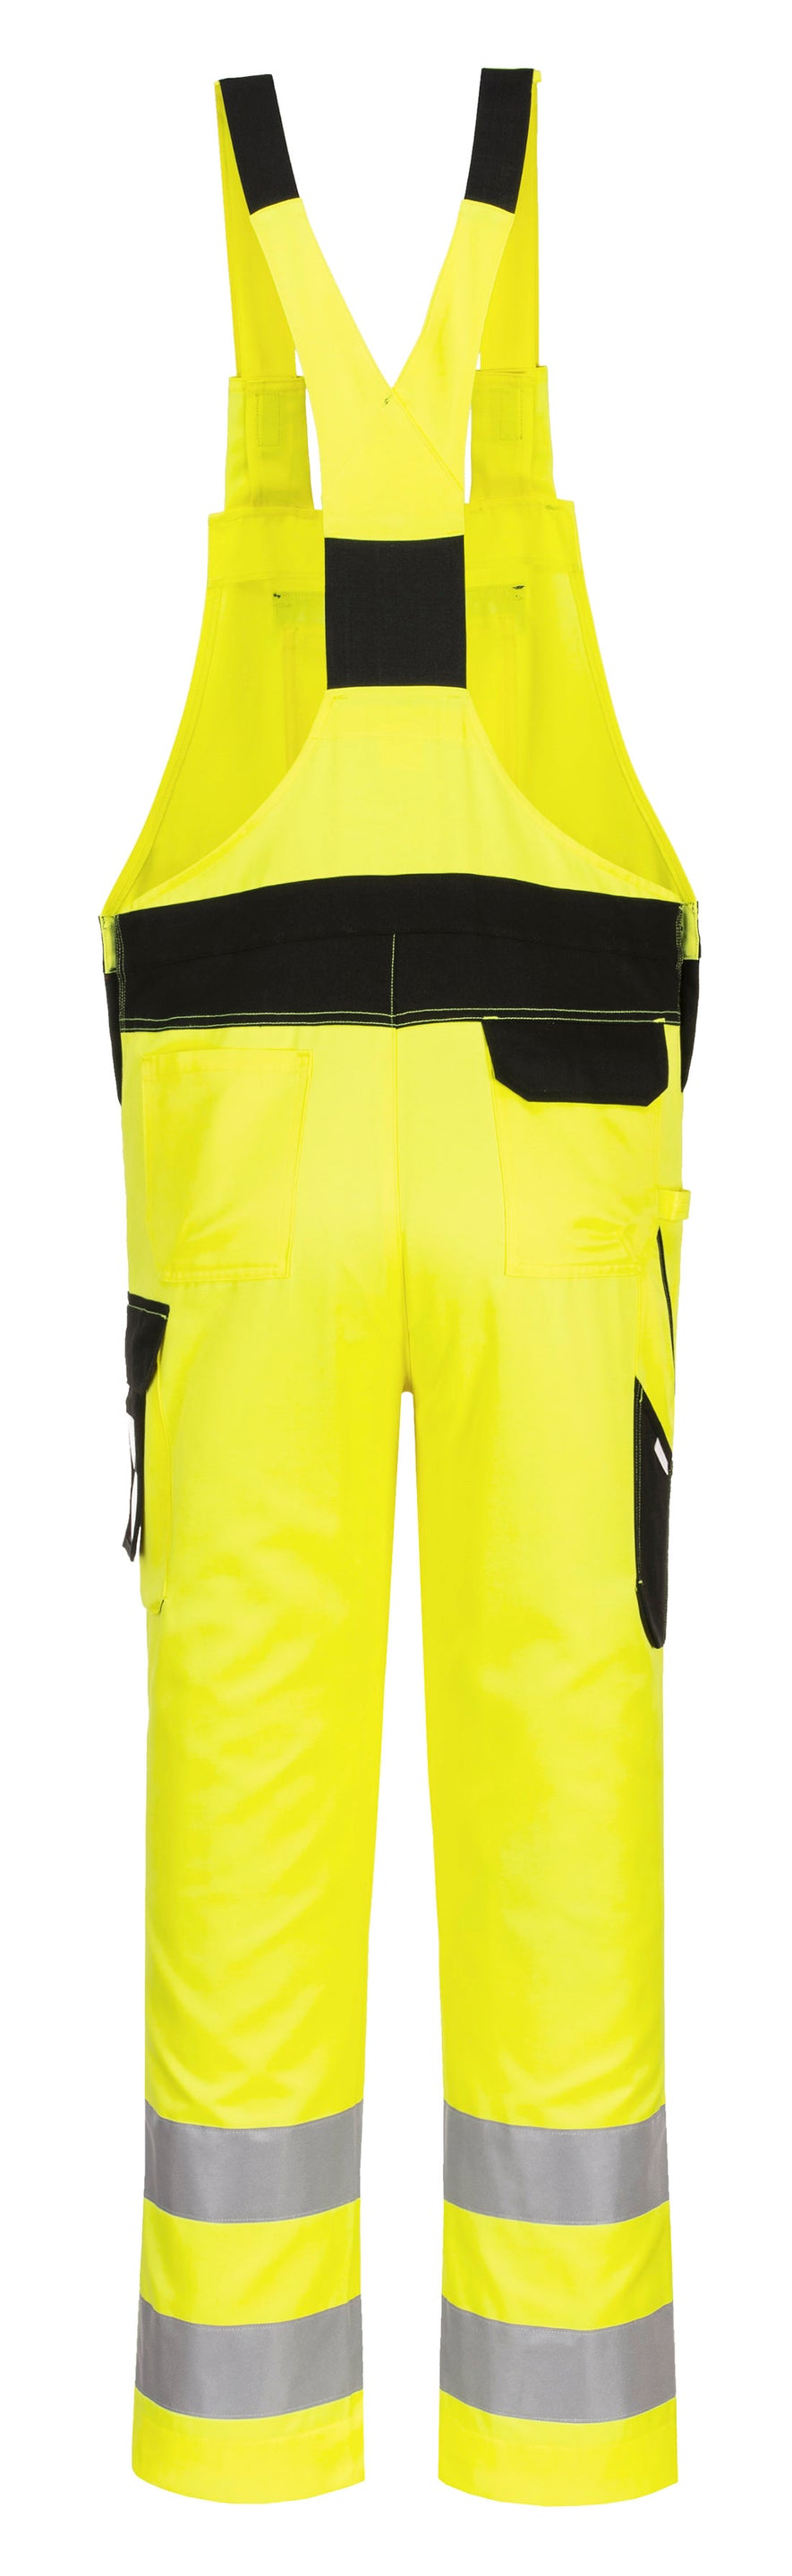 Back of Portwest PW2 Hi-Vis Bib and Brace in yellow with black patch on strap, pockets on legs and waistband, shoulder straps and reflective strips on both legs.